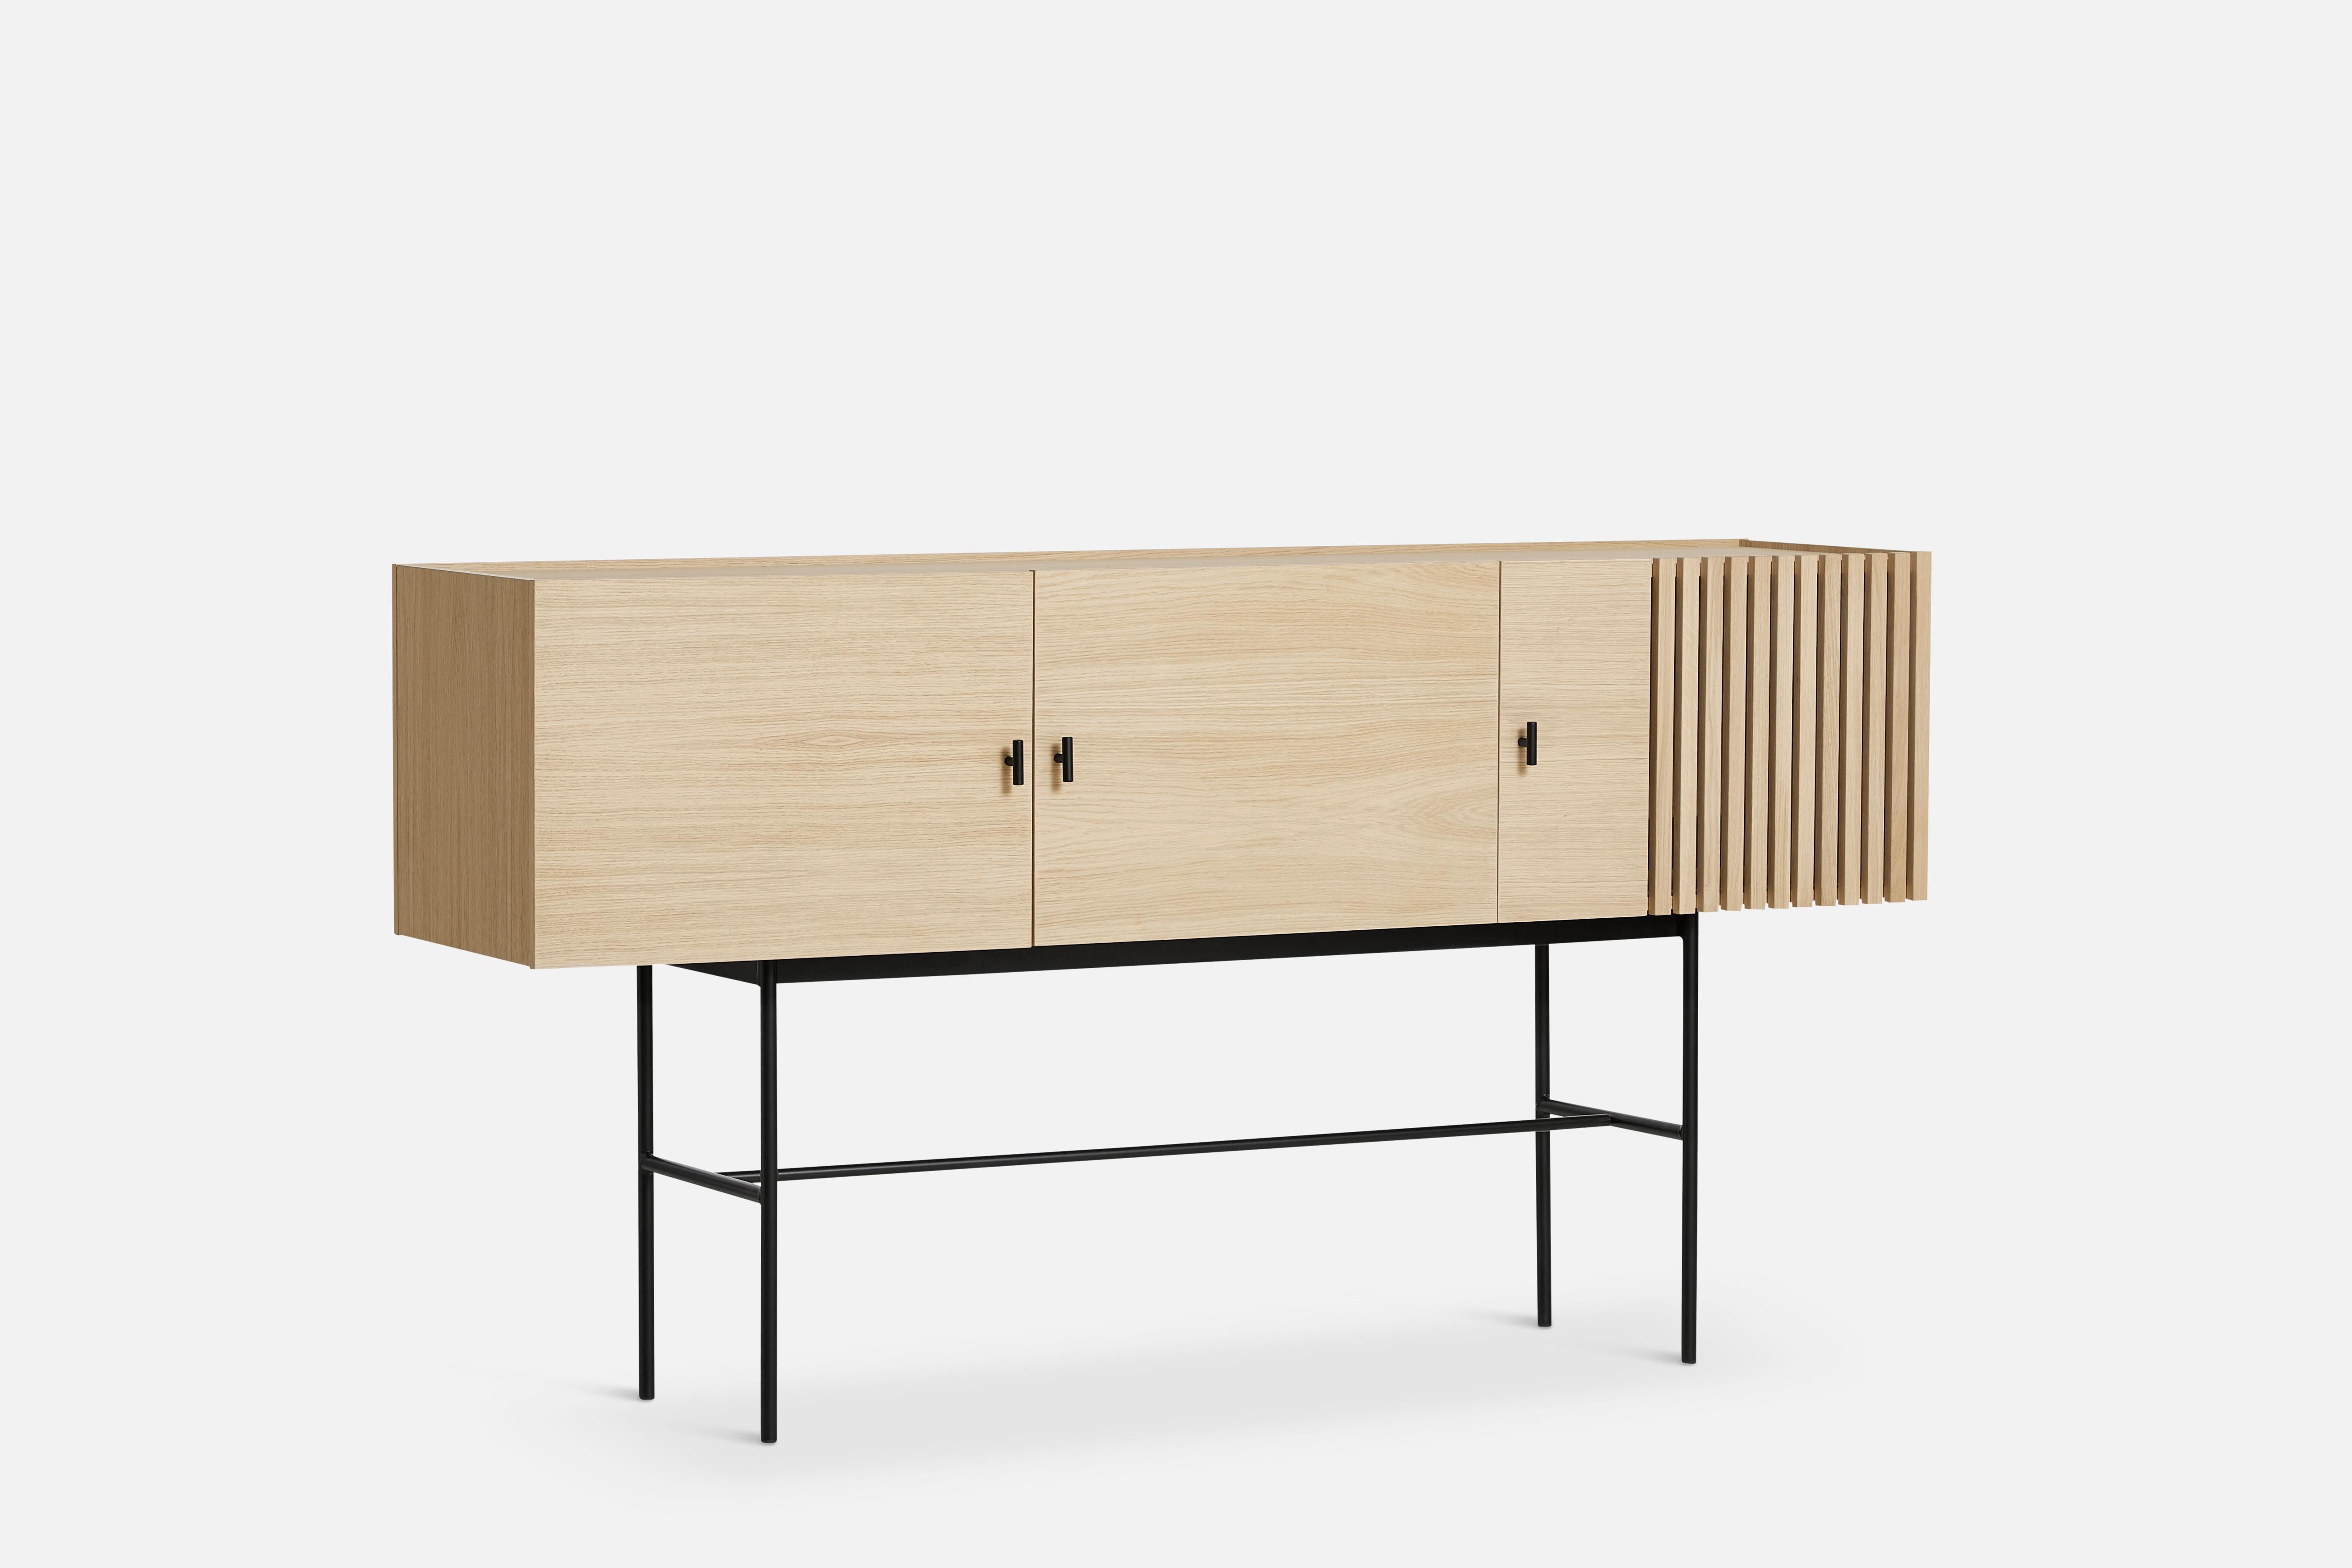 White oak array sideboard 180 by Says Who
Materials: Oak, metal
Dimensions: D 44 x W 180 x H 97 cm
Also available in different colours and materials. 

The founders, Mia and Torben Koed, decided to put their 30 years of experience into a new